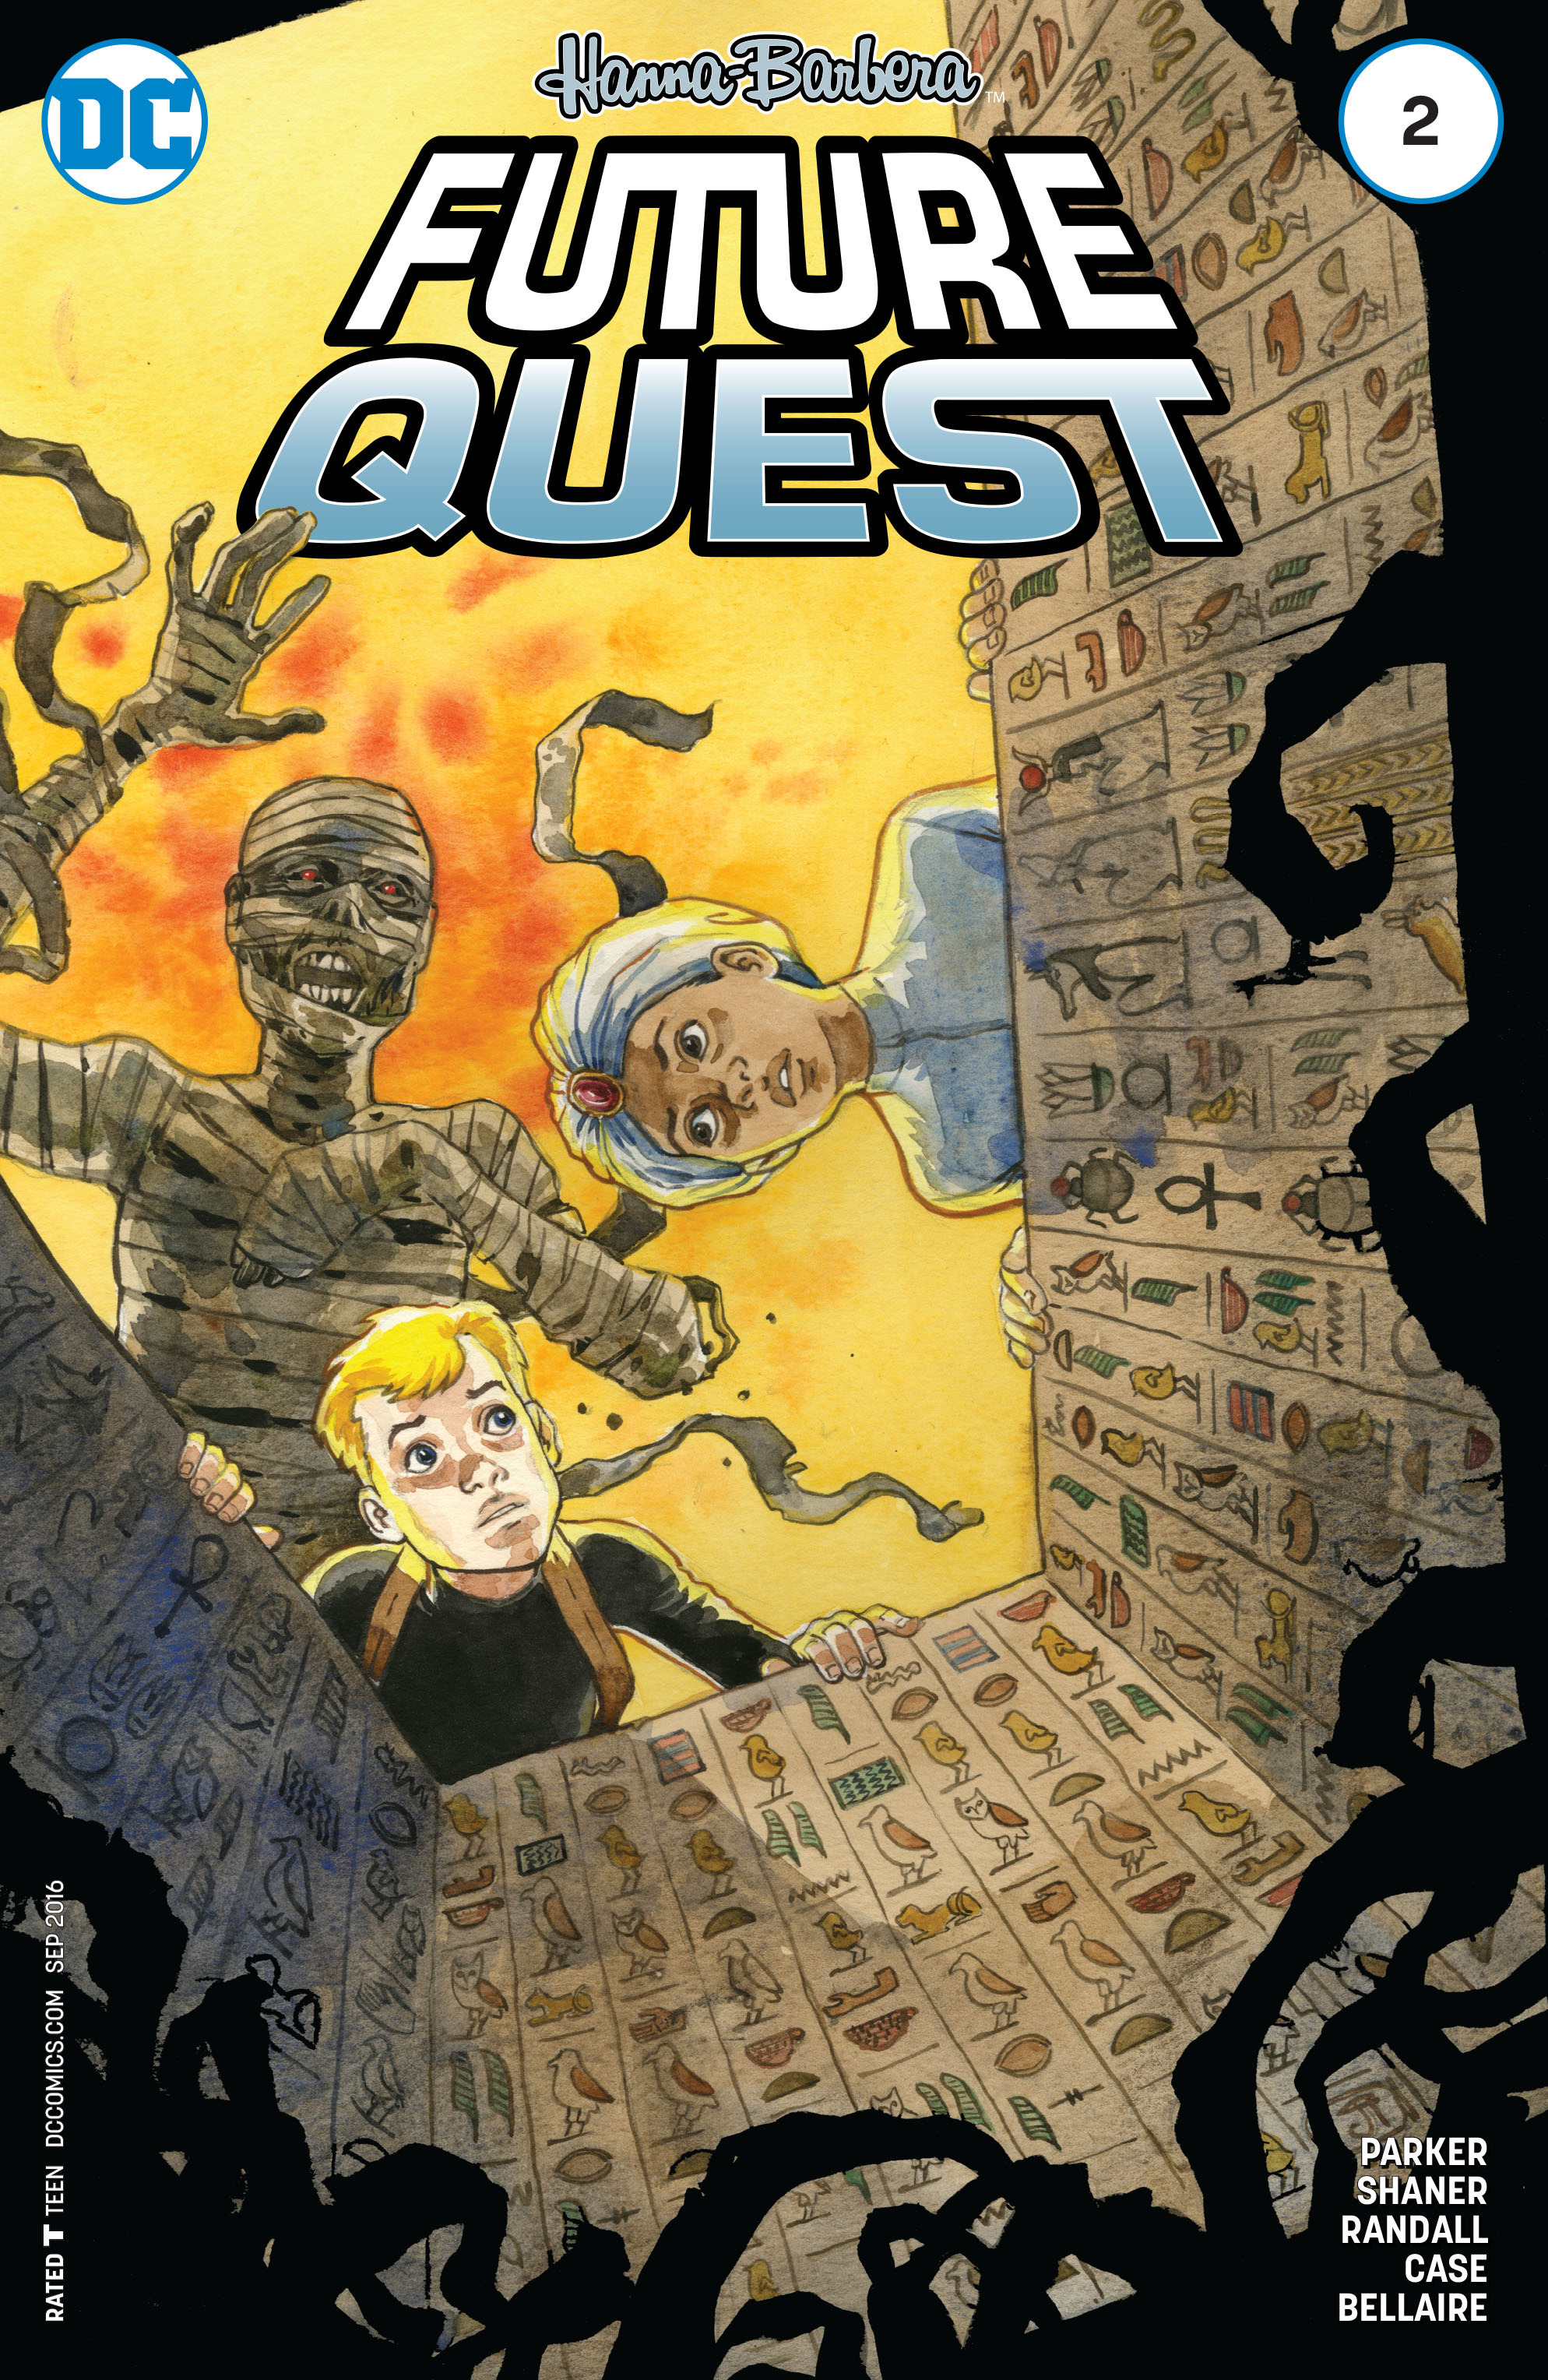 Read online Future Quest comic -  Issue #2 - 3